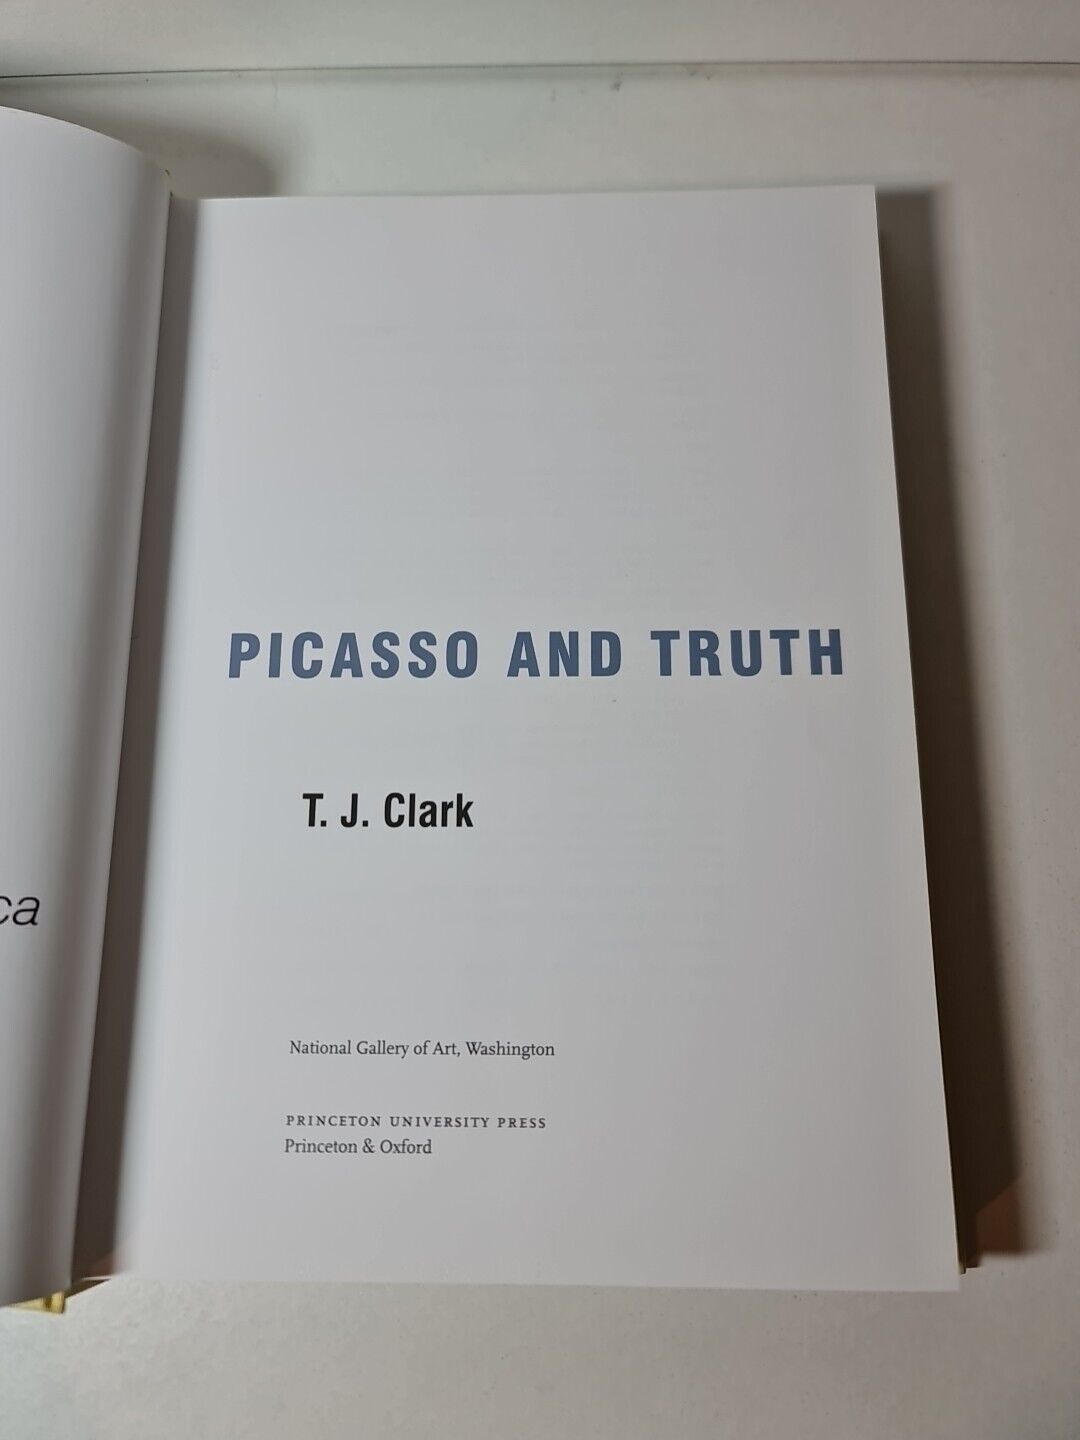 Picasso and Truth: From Cubism to Guernica by T. J. Clark (2013)